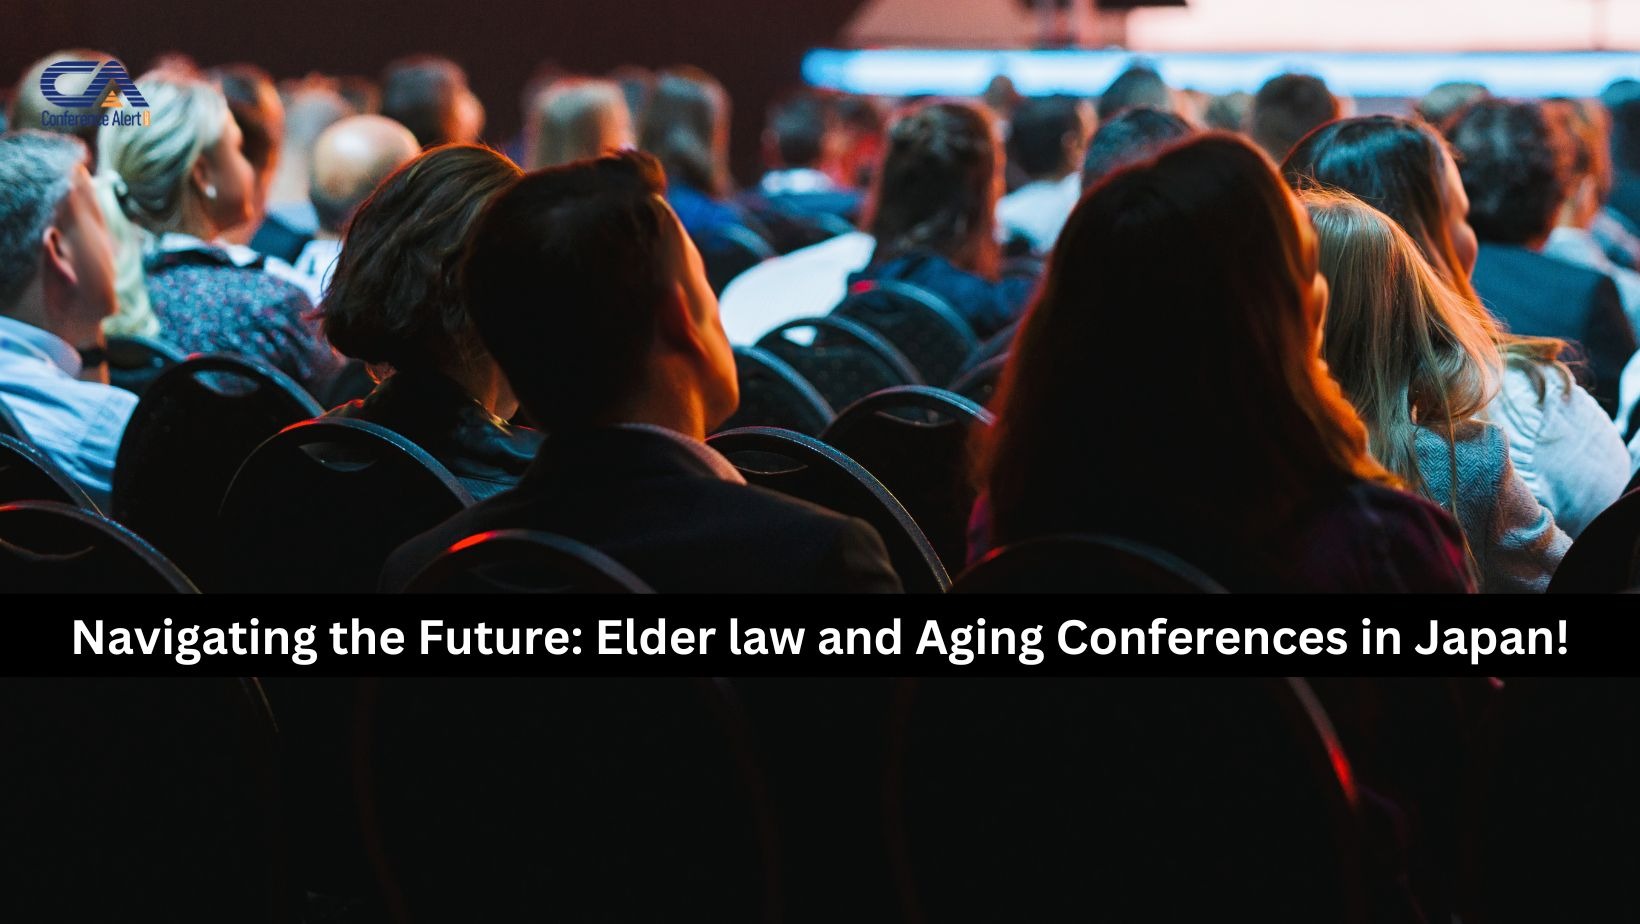 Navigating the Future: Elder law and Aging Conferences in Japan! – Telegraph